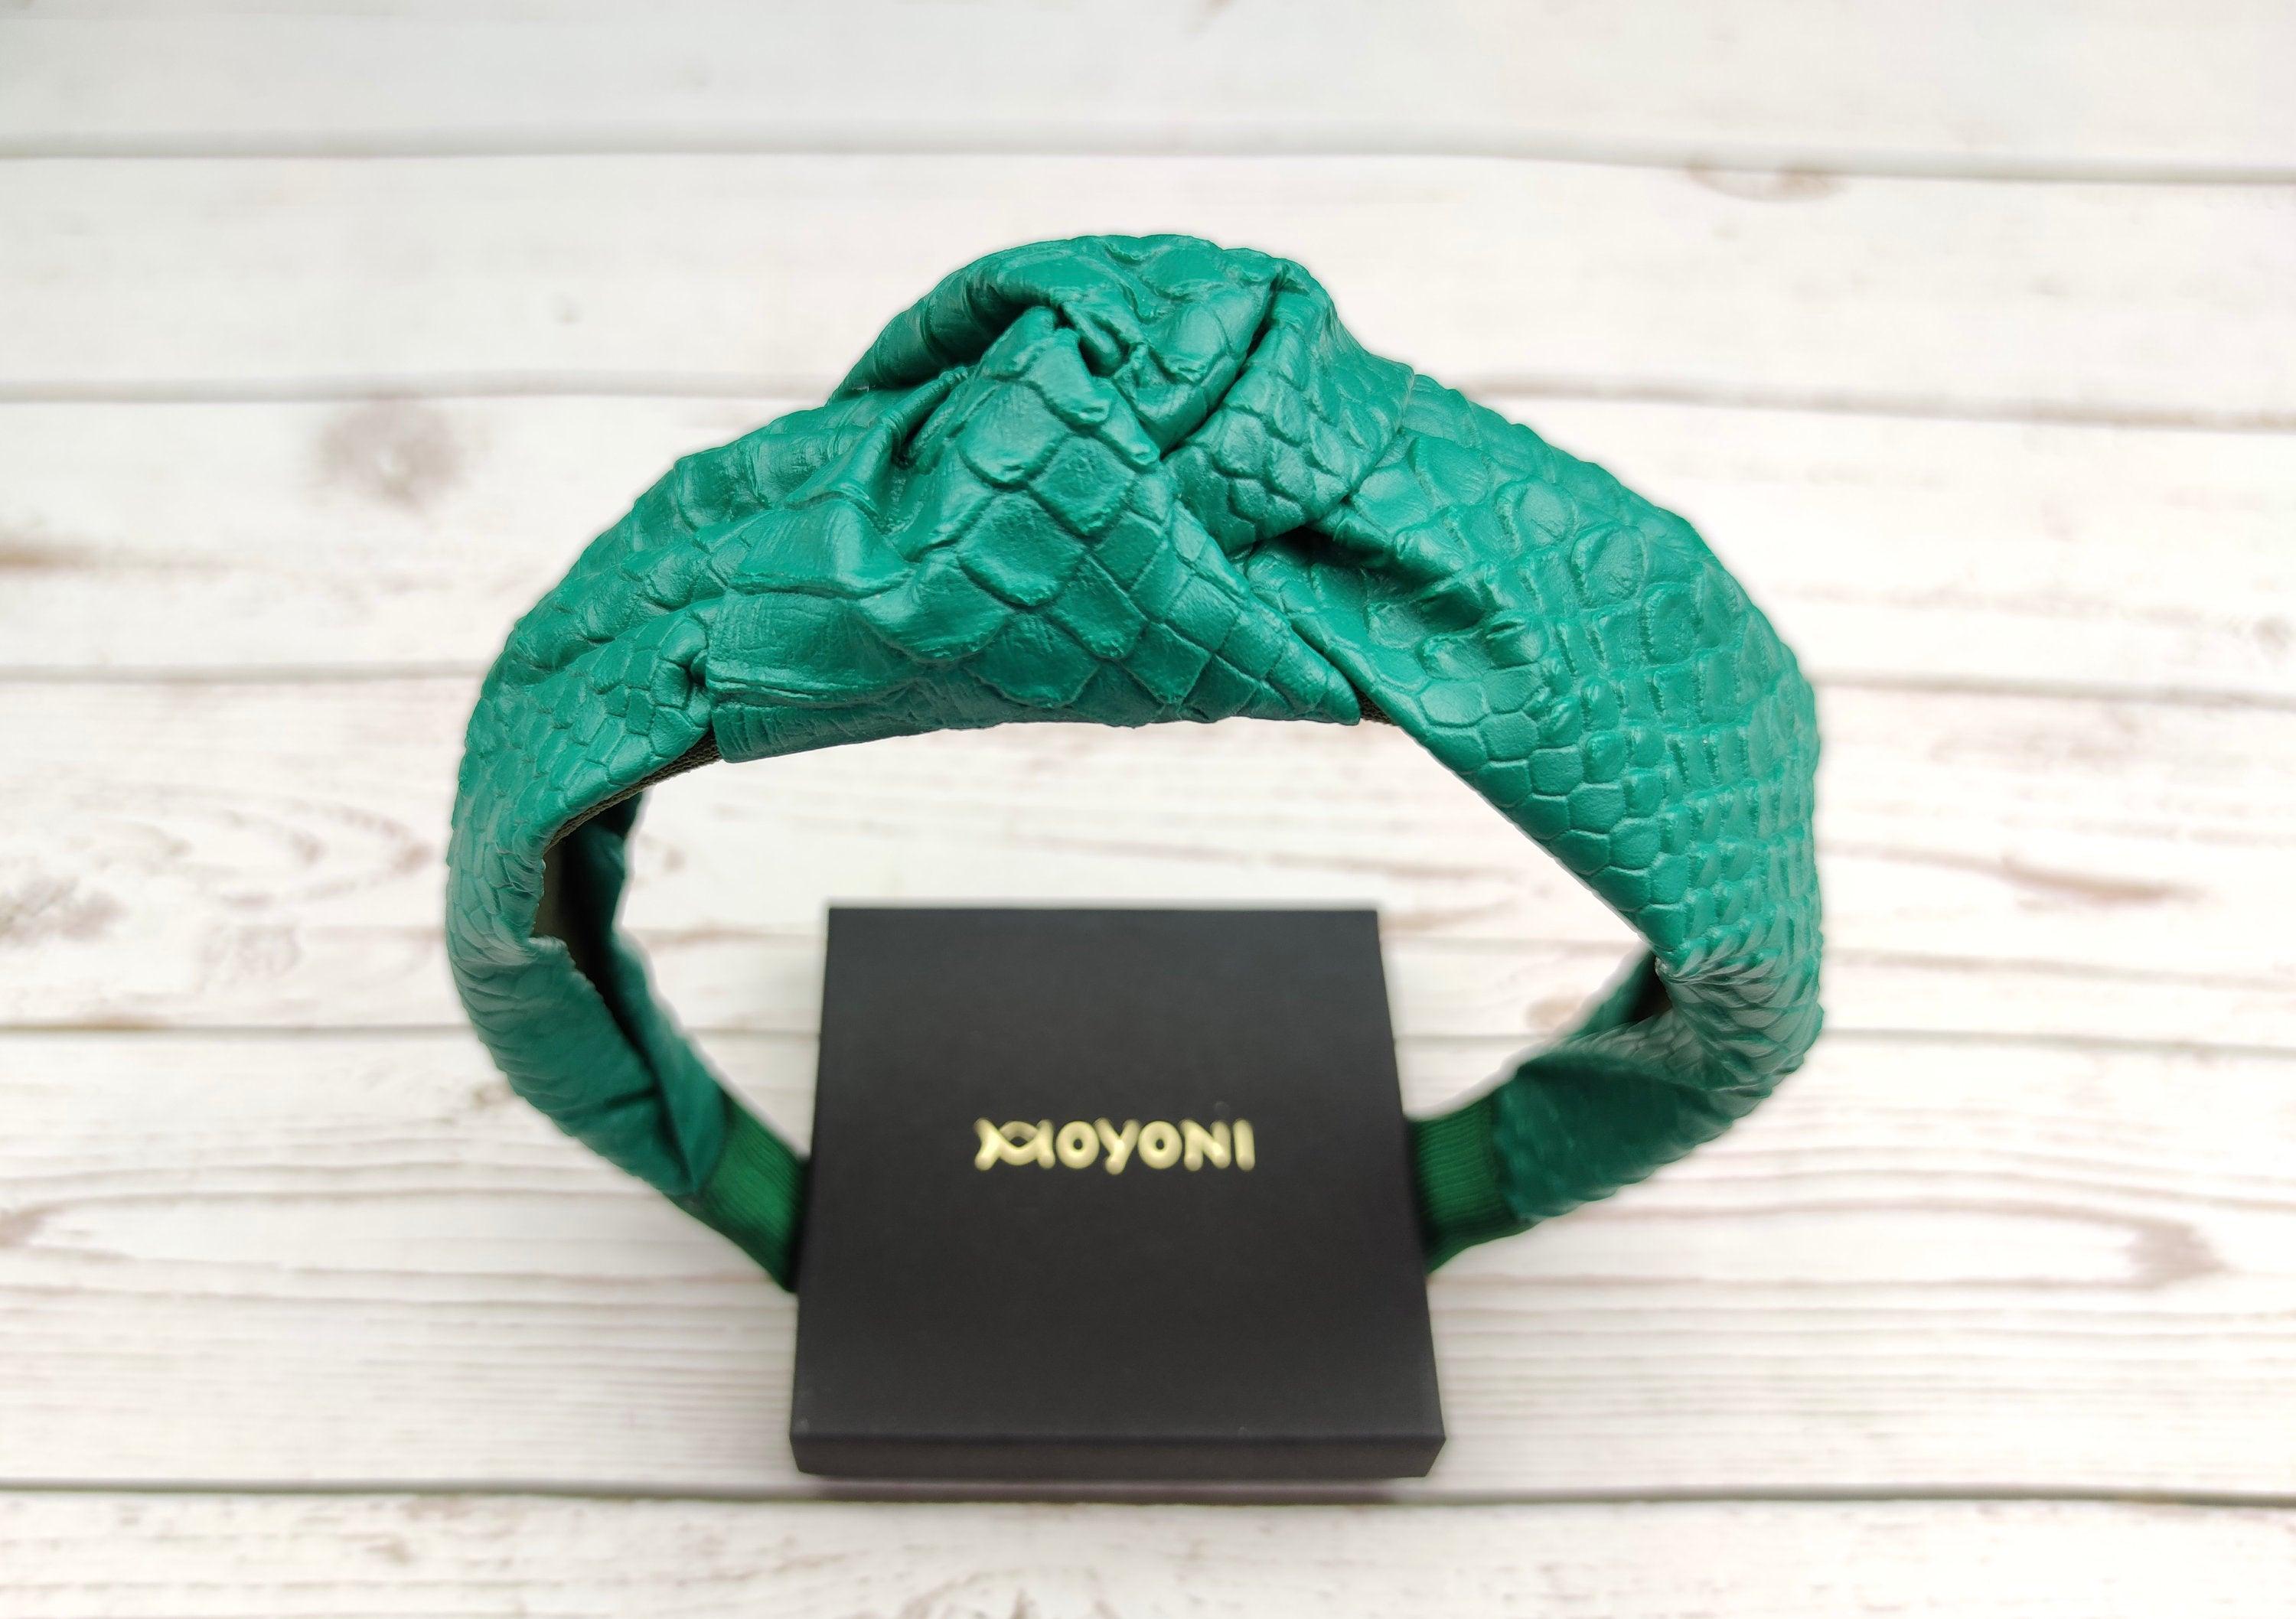 Unique Green Faux Leather Twist Headband with Snake Skin Pattern - Stylish and Classic Women's Hairband available at Moyoni Design